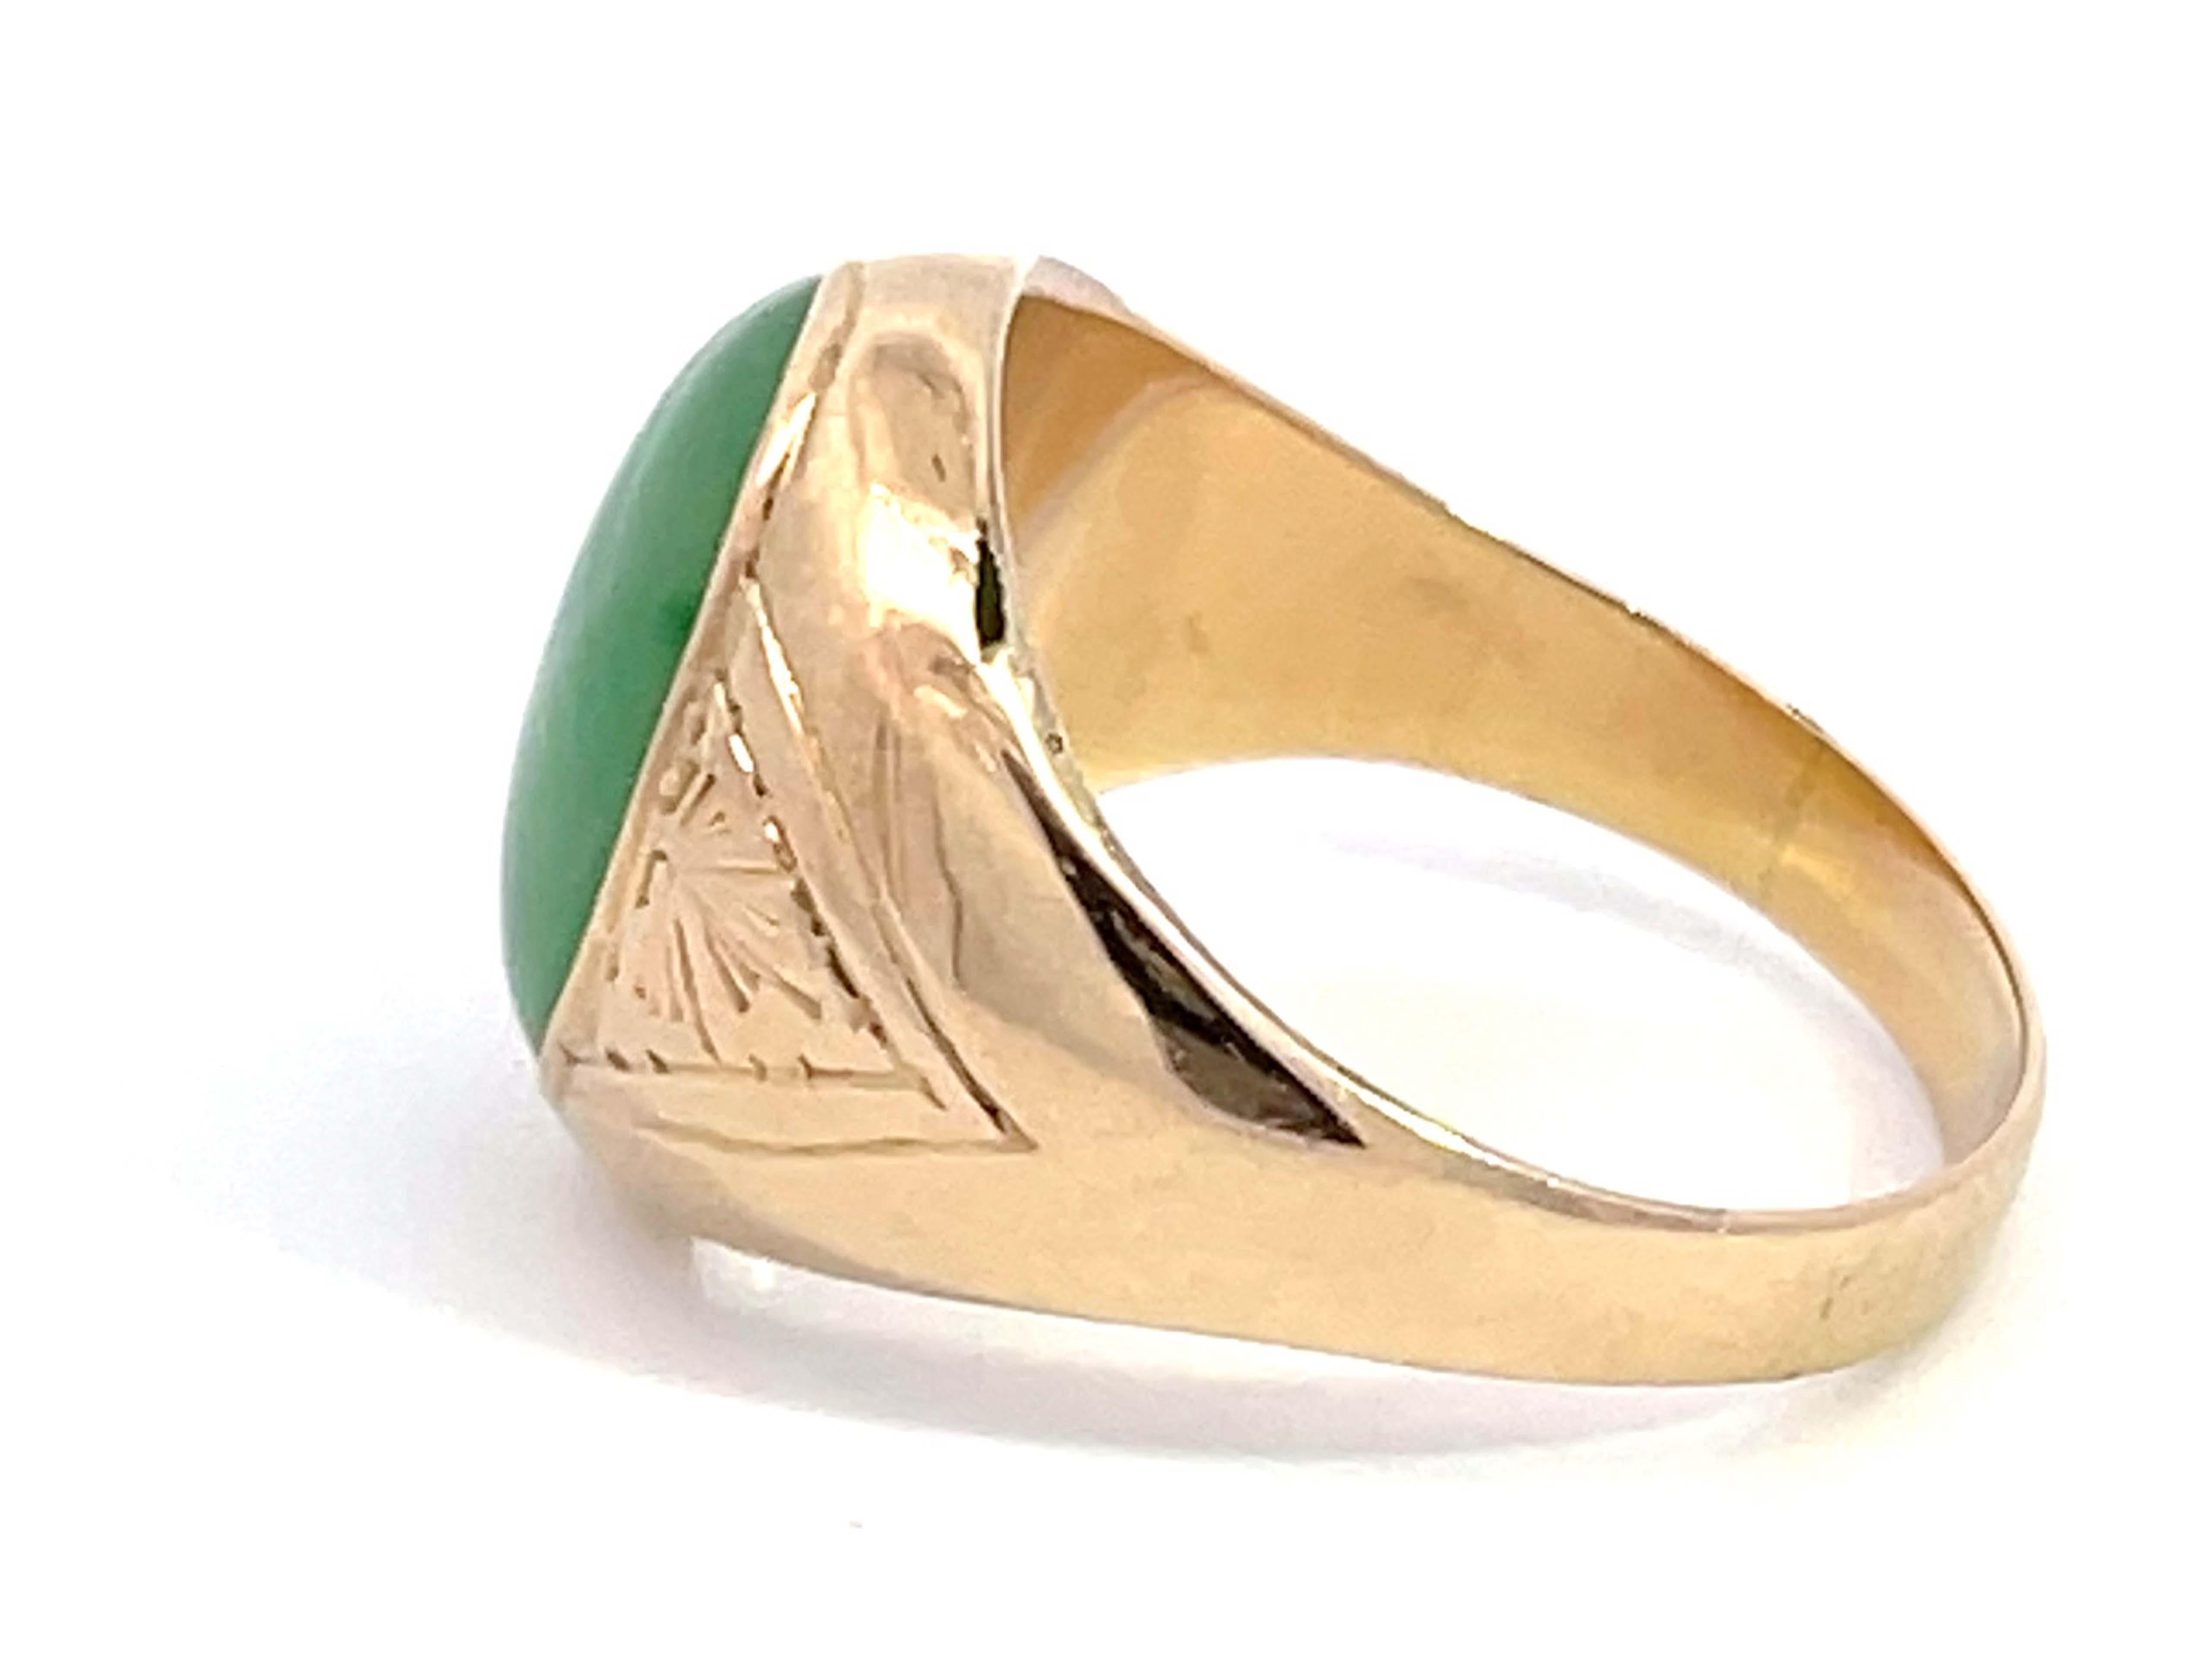 Oval Cabochon Green Jade Ring with Triangle Design Shoulders in 14k Yellow Gold In Excellent Condition For Sale In Honolulu, HI